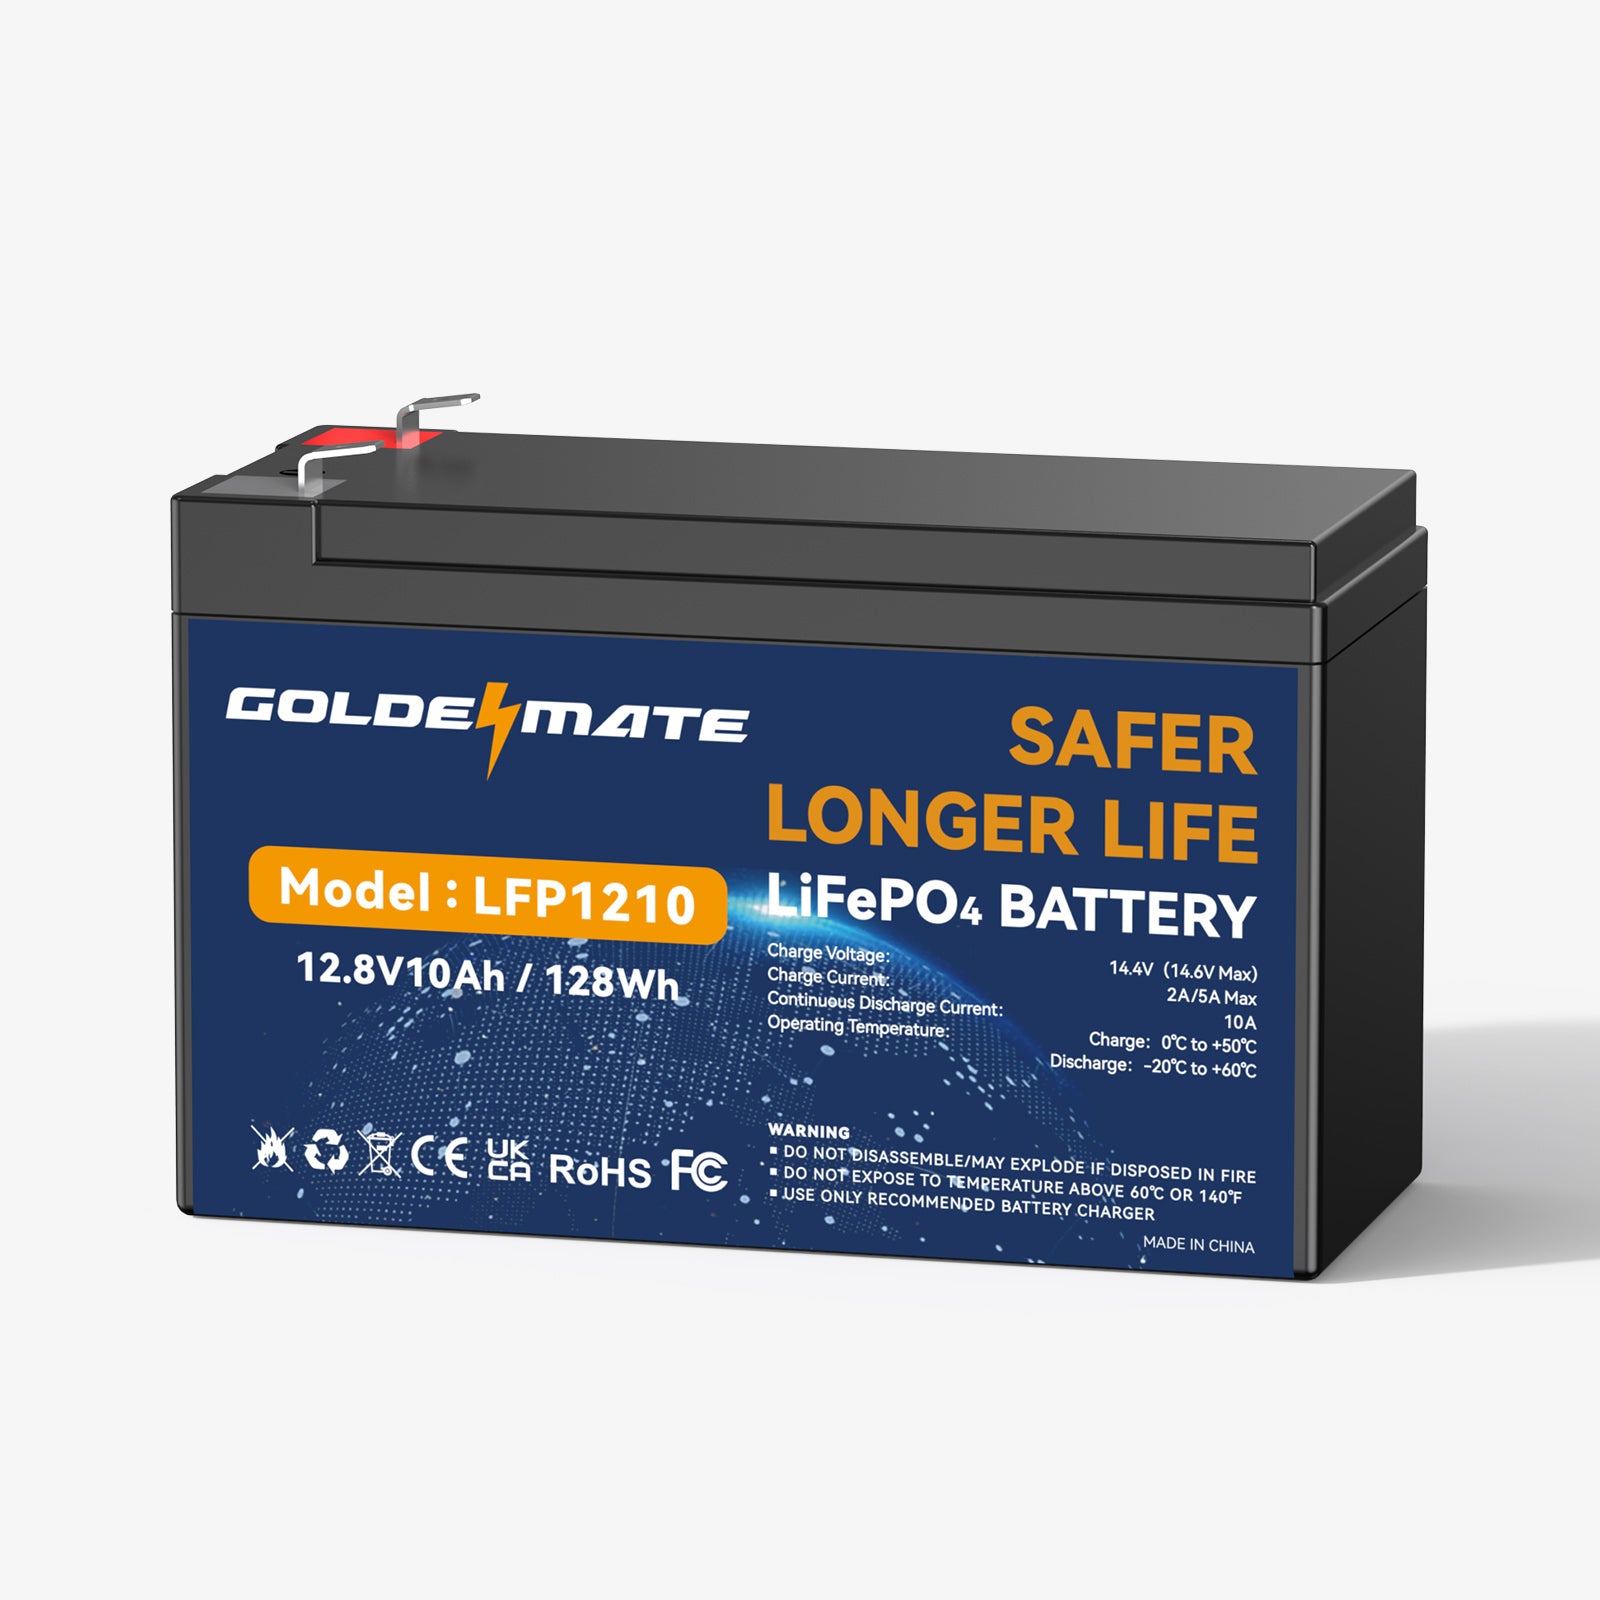 GoldenMate 12V 10Ah LiFePO4 Lithium Battery, 128Wh Output Power, Built-in BMS